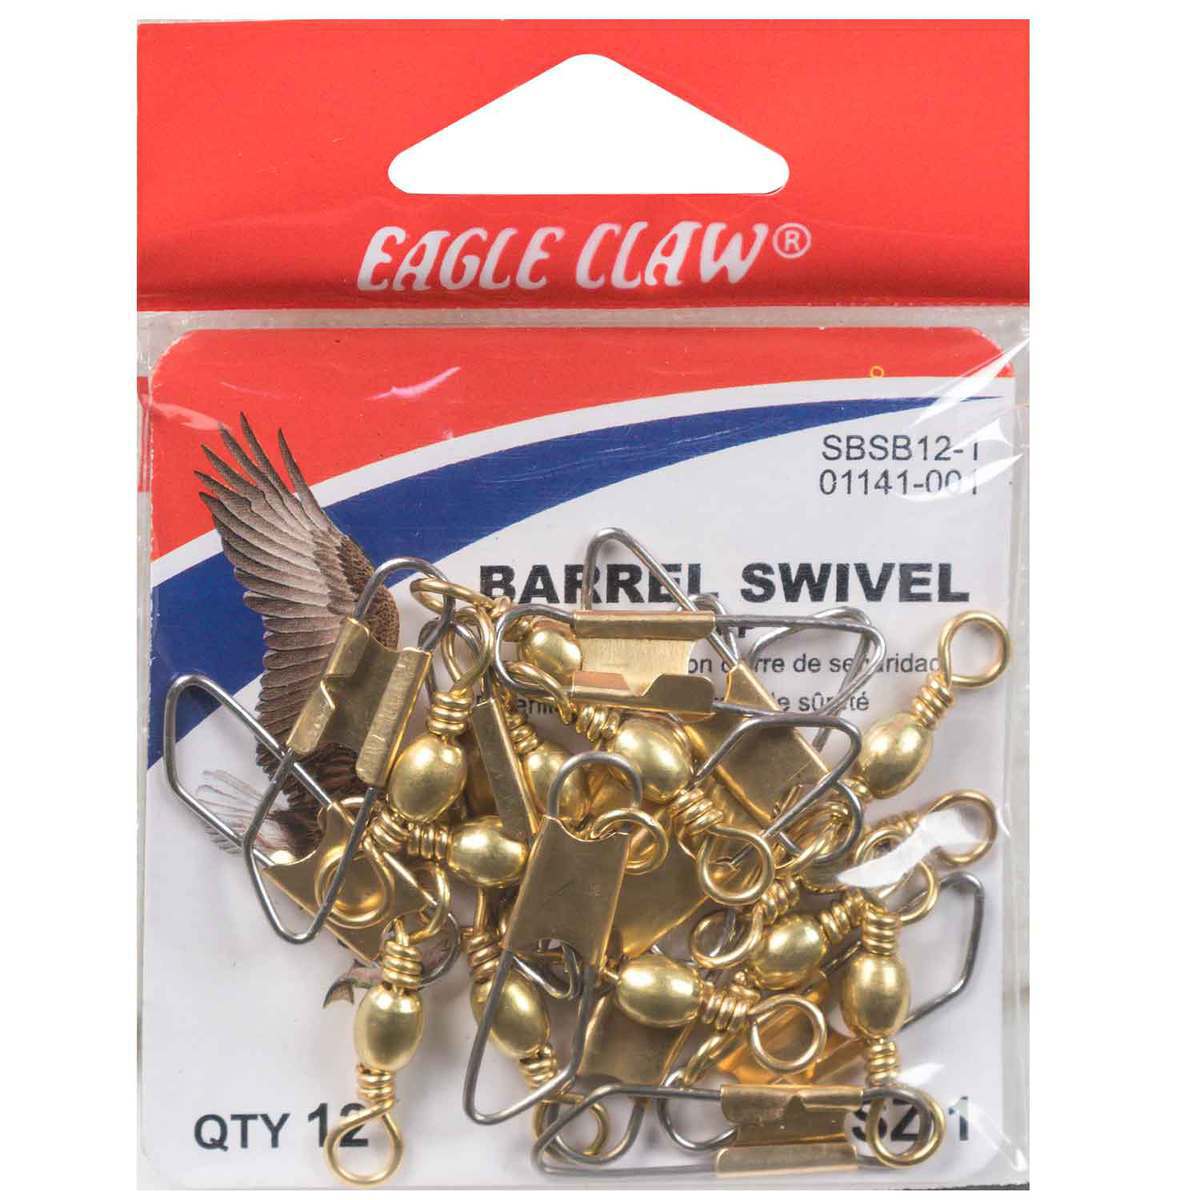 Eagle Claw Size 12 Barrel Swivel w/Safety Snap 3 pkgs Of 7 Fishing